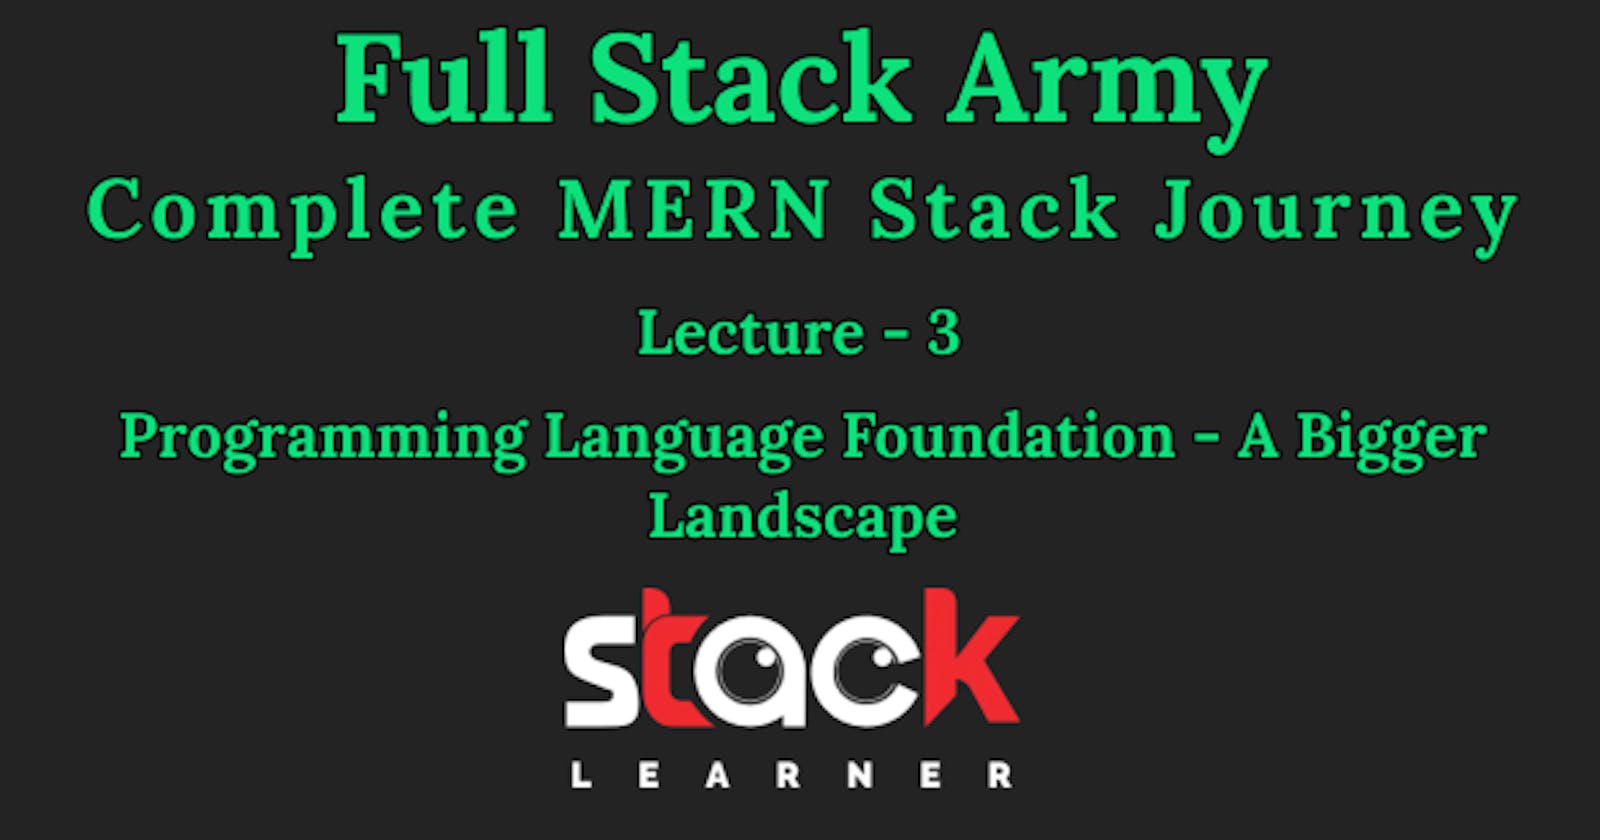 Lecture 3 | Programming Language Foundation - A Bigger Landscape | Full Stack Army